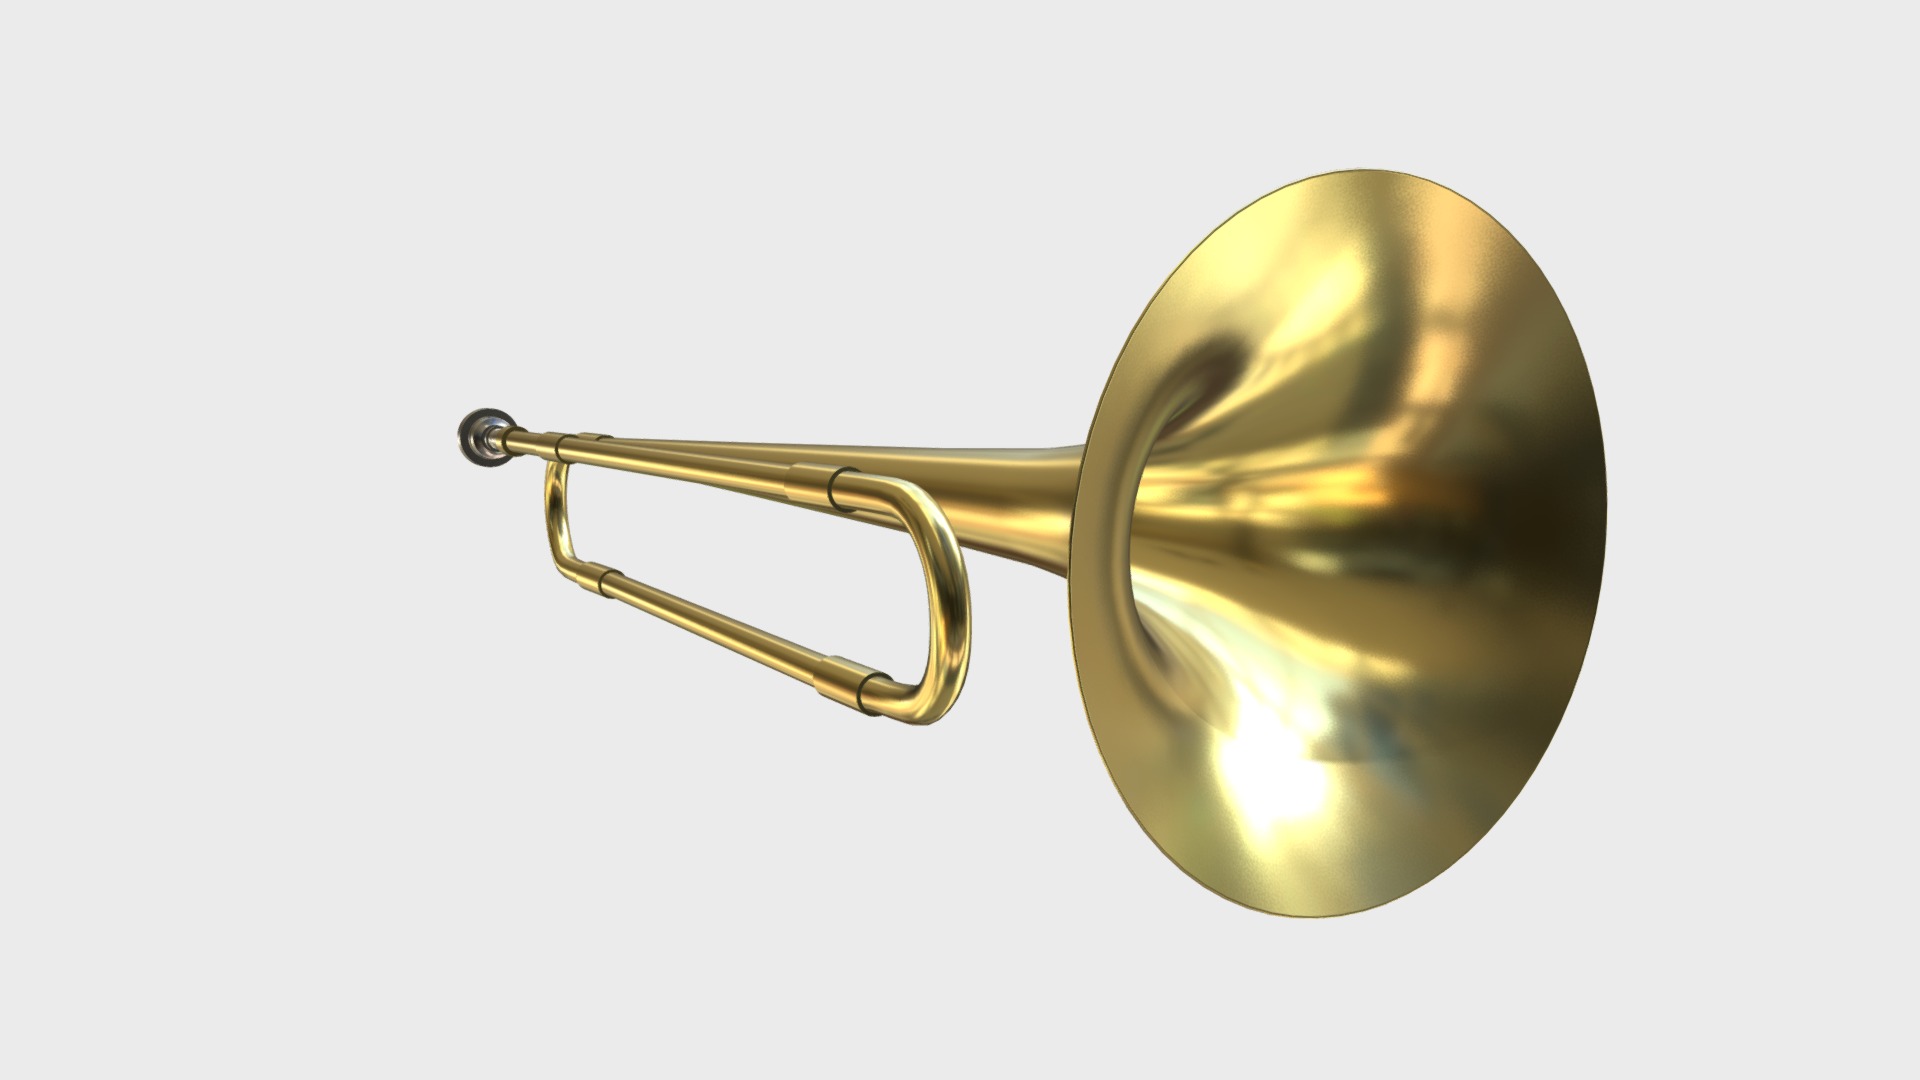 3D model School band toy trumpet - This is a 3D model of the School band toy trumpet. The 3D model is about a gold trumpet with a white background.